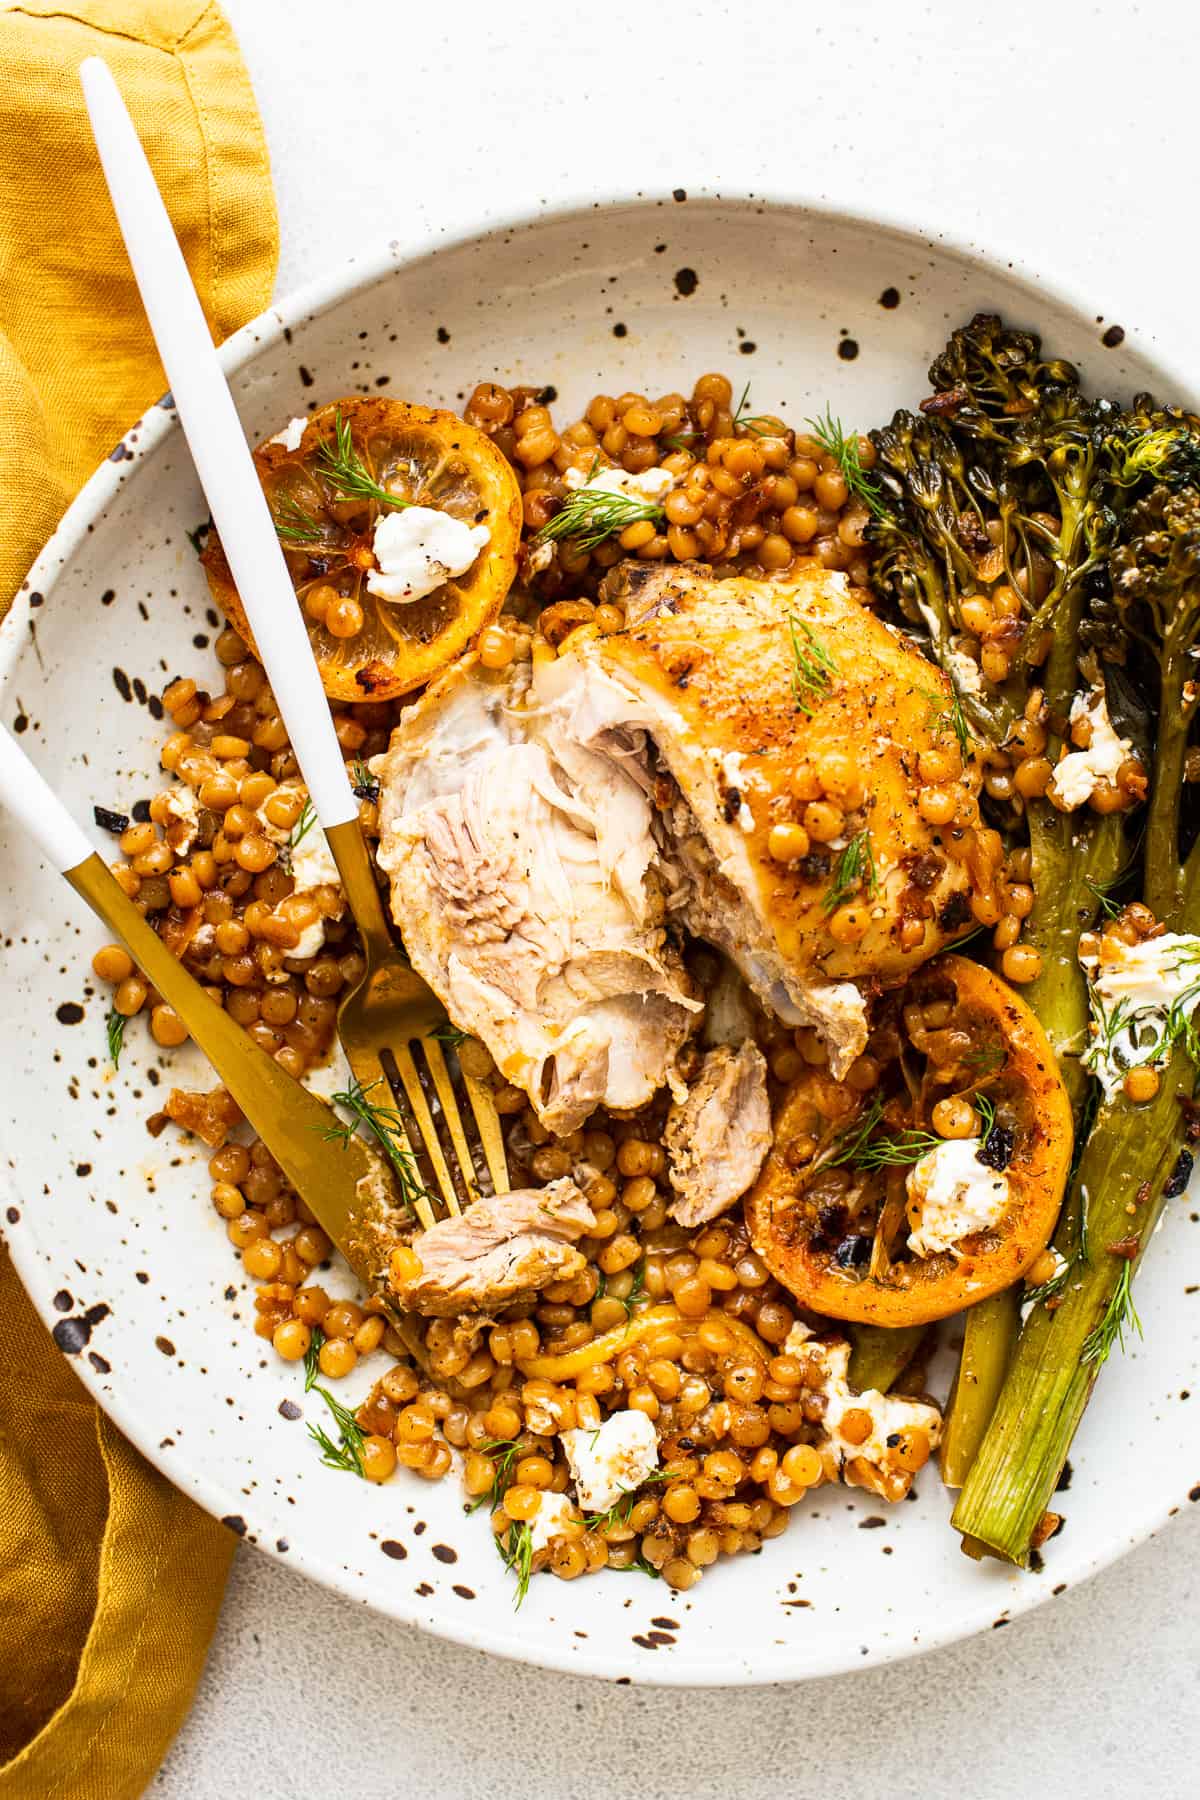 Lemon chicken skillet on a plate with broccolini and couscous.